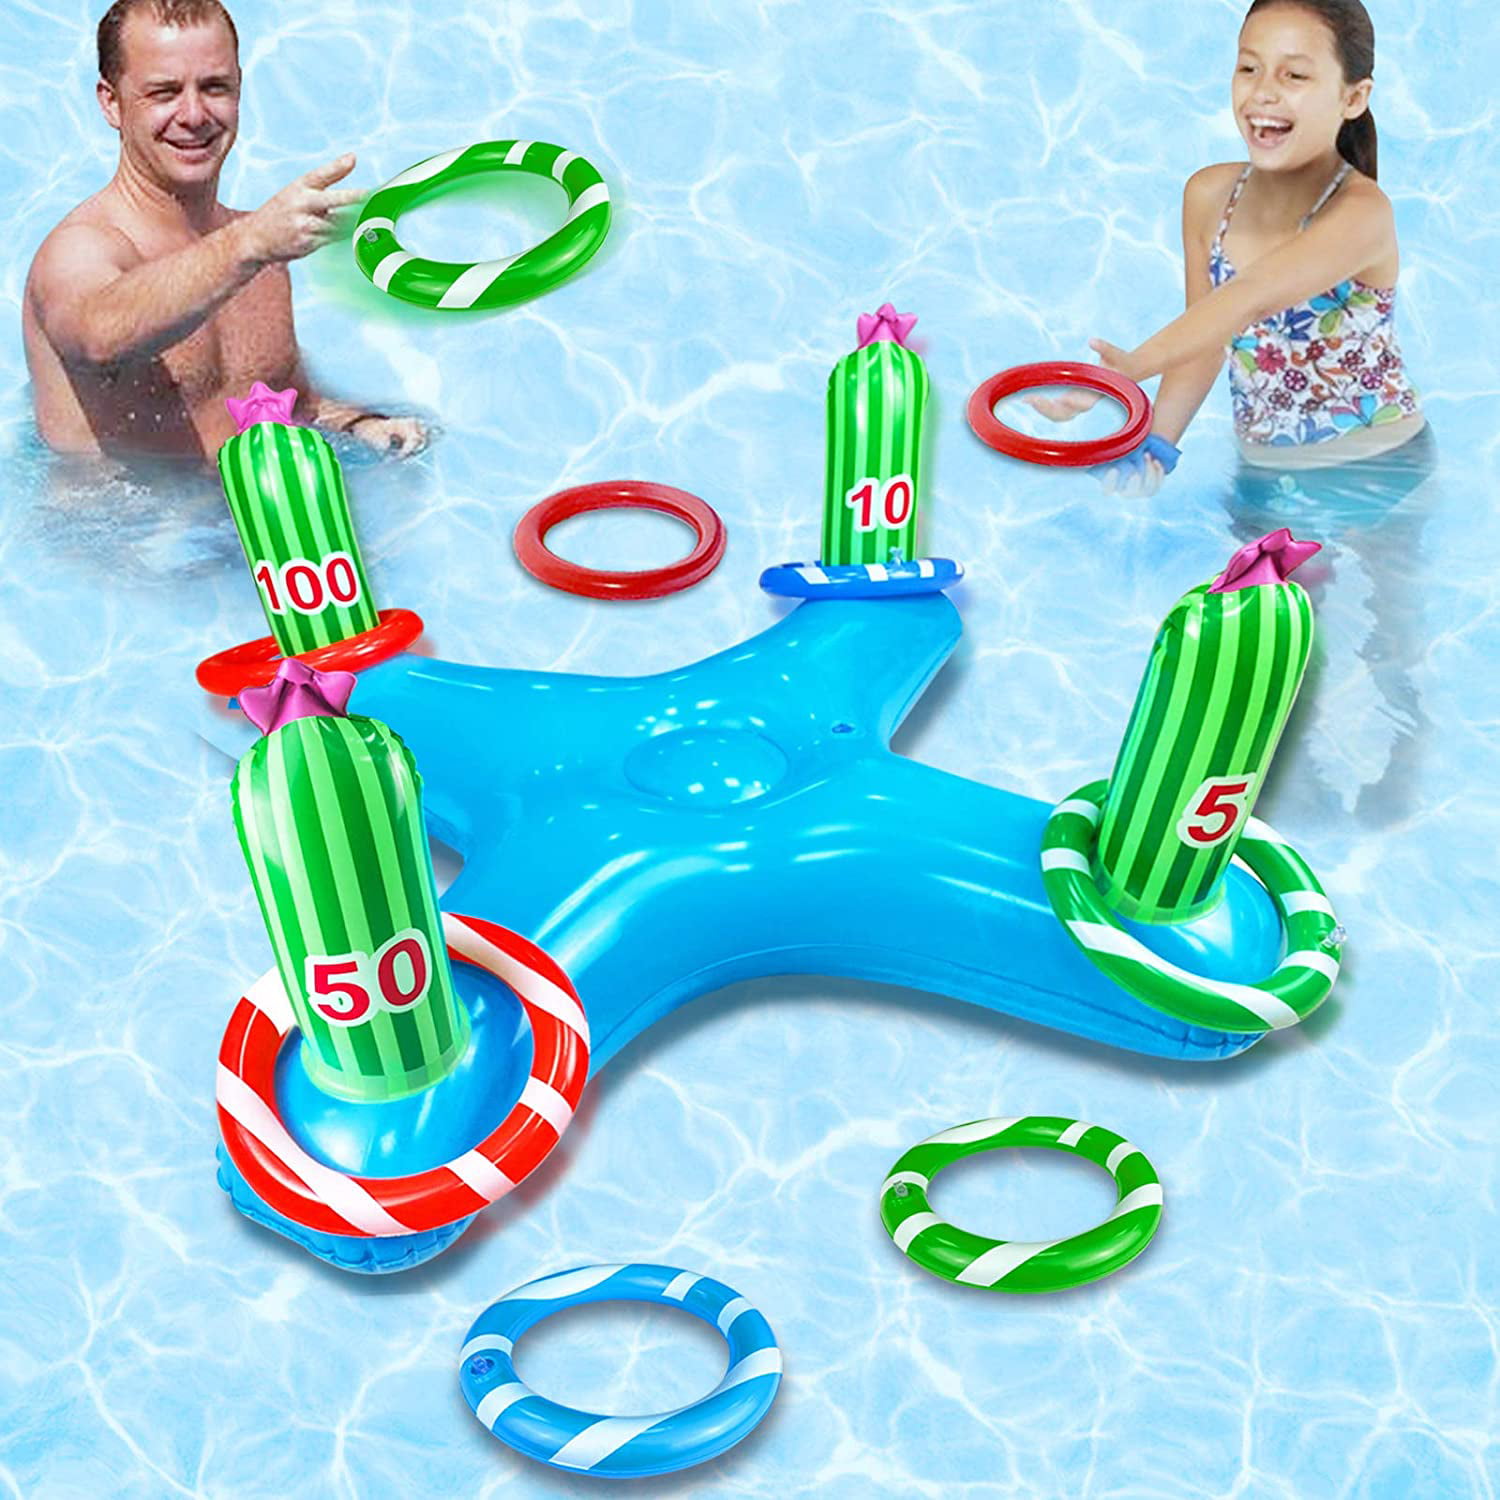 Leafgreenus Inflatable Pool Ring Toss Game with 4 Ring Toss Rings Inflatable Cross Ring Toss Water Flatting Pool Game Toys for Hawaii Luau Party Decorations Pool Party Game